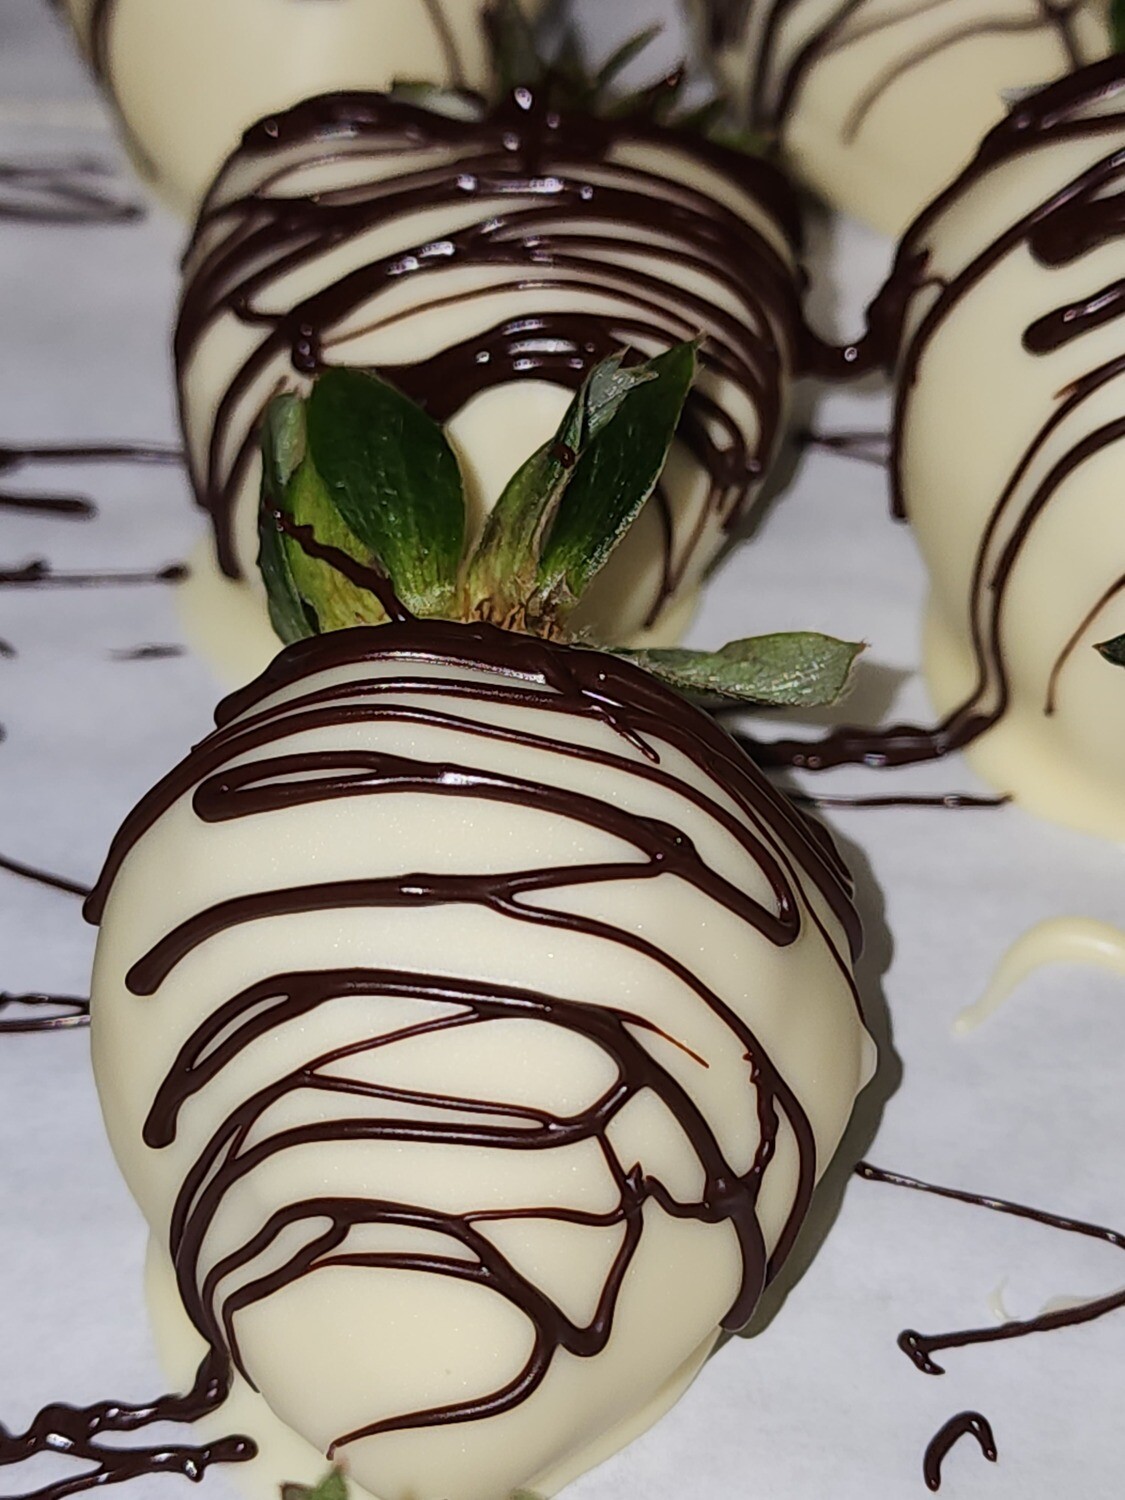 White Chocolate Dipped Strawberries - One Dozen (12) for $28.00 Pick Up at Strawberry Shack On Feb. 14th, 2023 VALENTINE'S DAY!